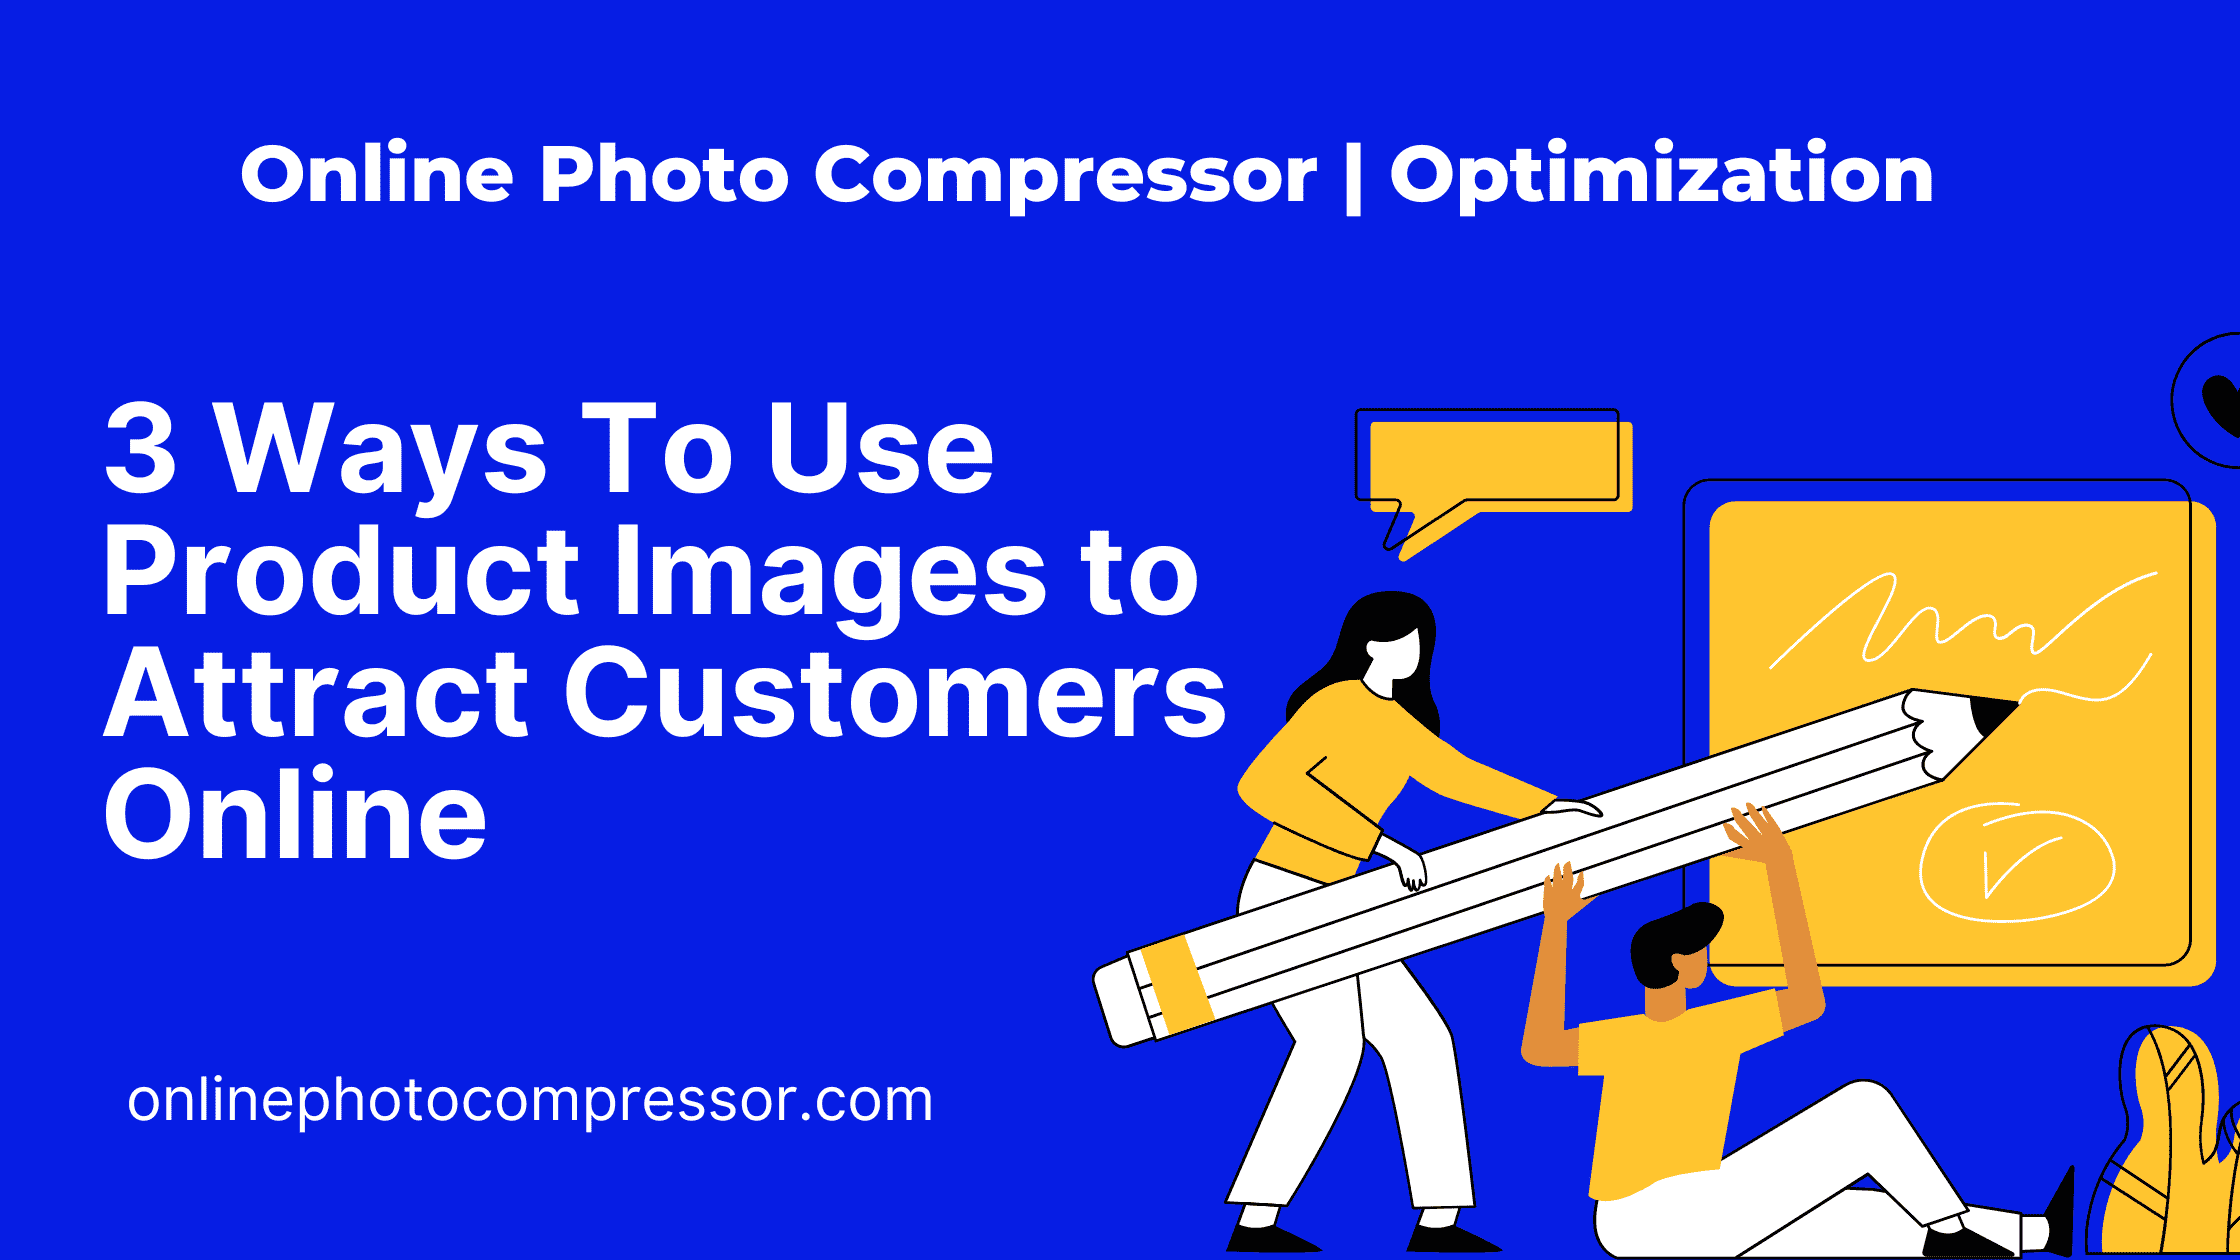 3 Ways To Use Product Images to Attract Customers Online